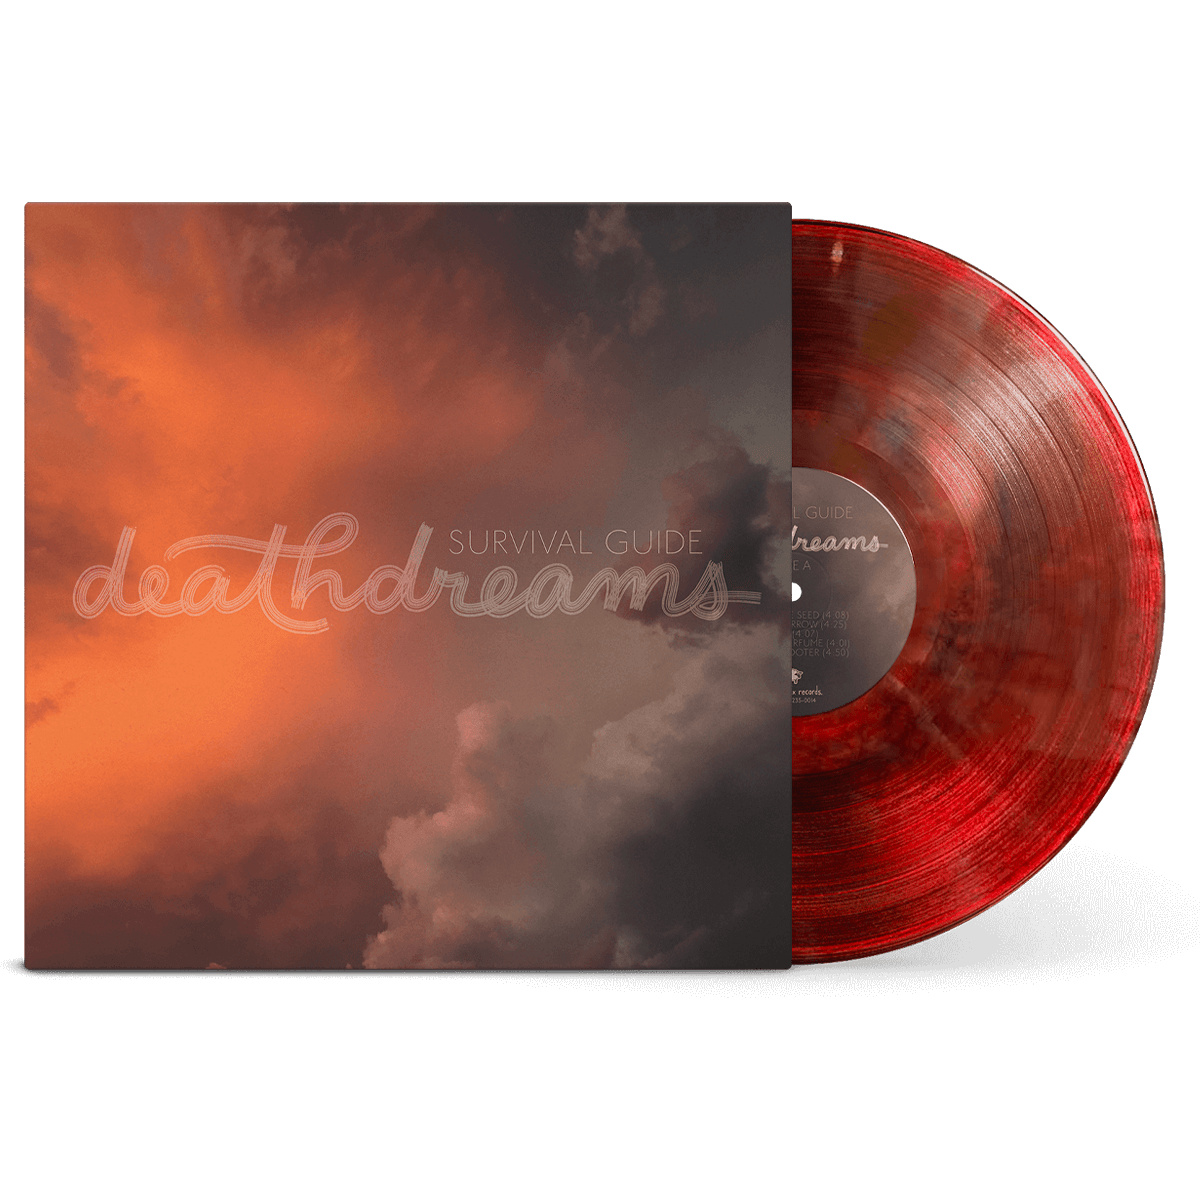 deathdreams Blood Variant Vinyl (Limited Edition of 100)